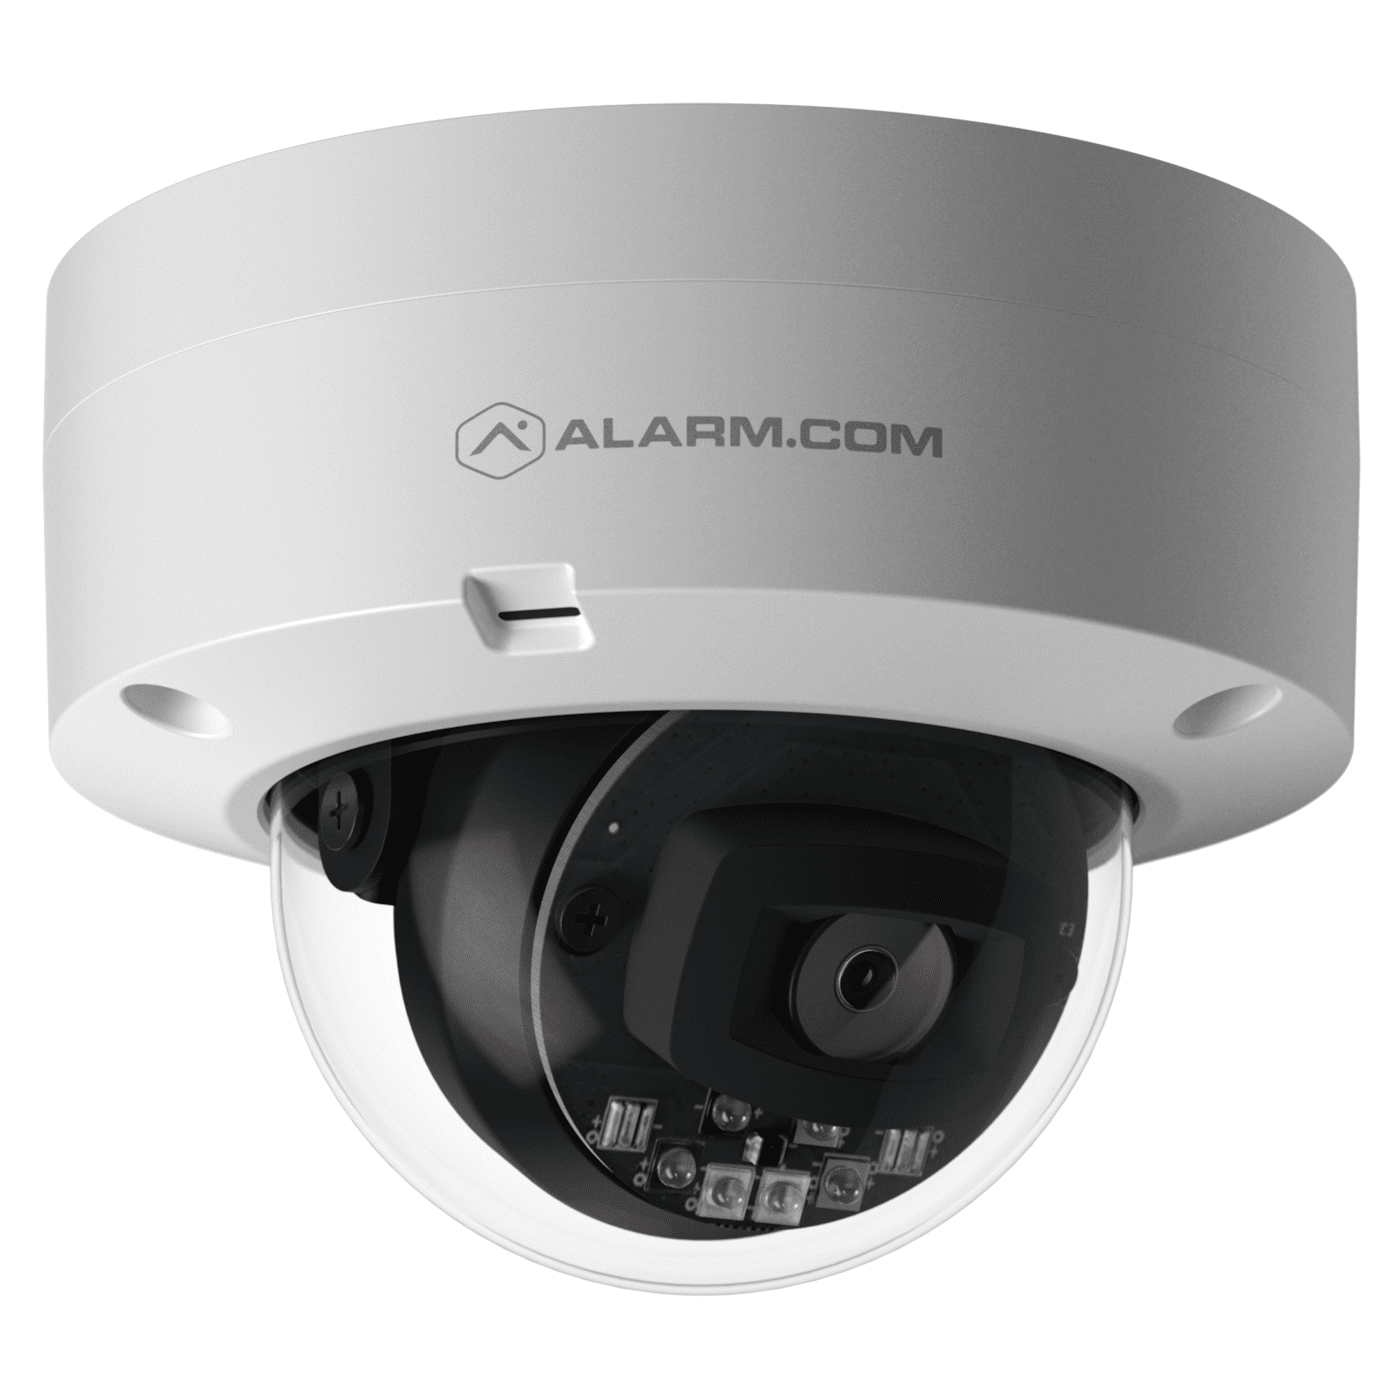 Alarm.com Pro Series Indoor/Outdoor Fixed Lens 2MP Dome PoE Security Camera ADC-VC827P